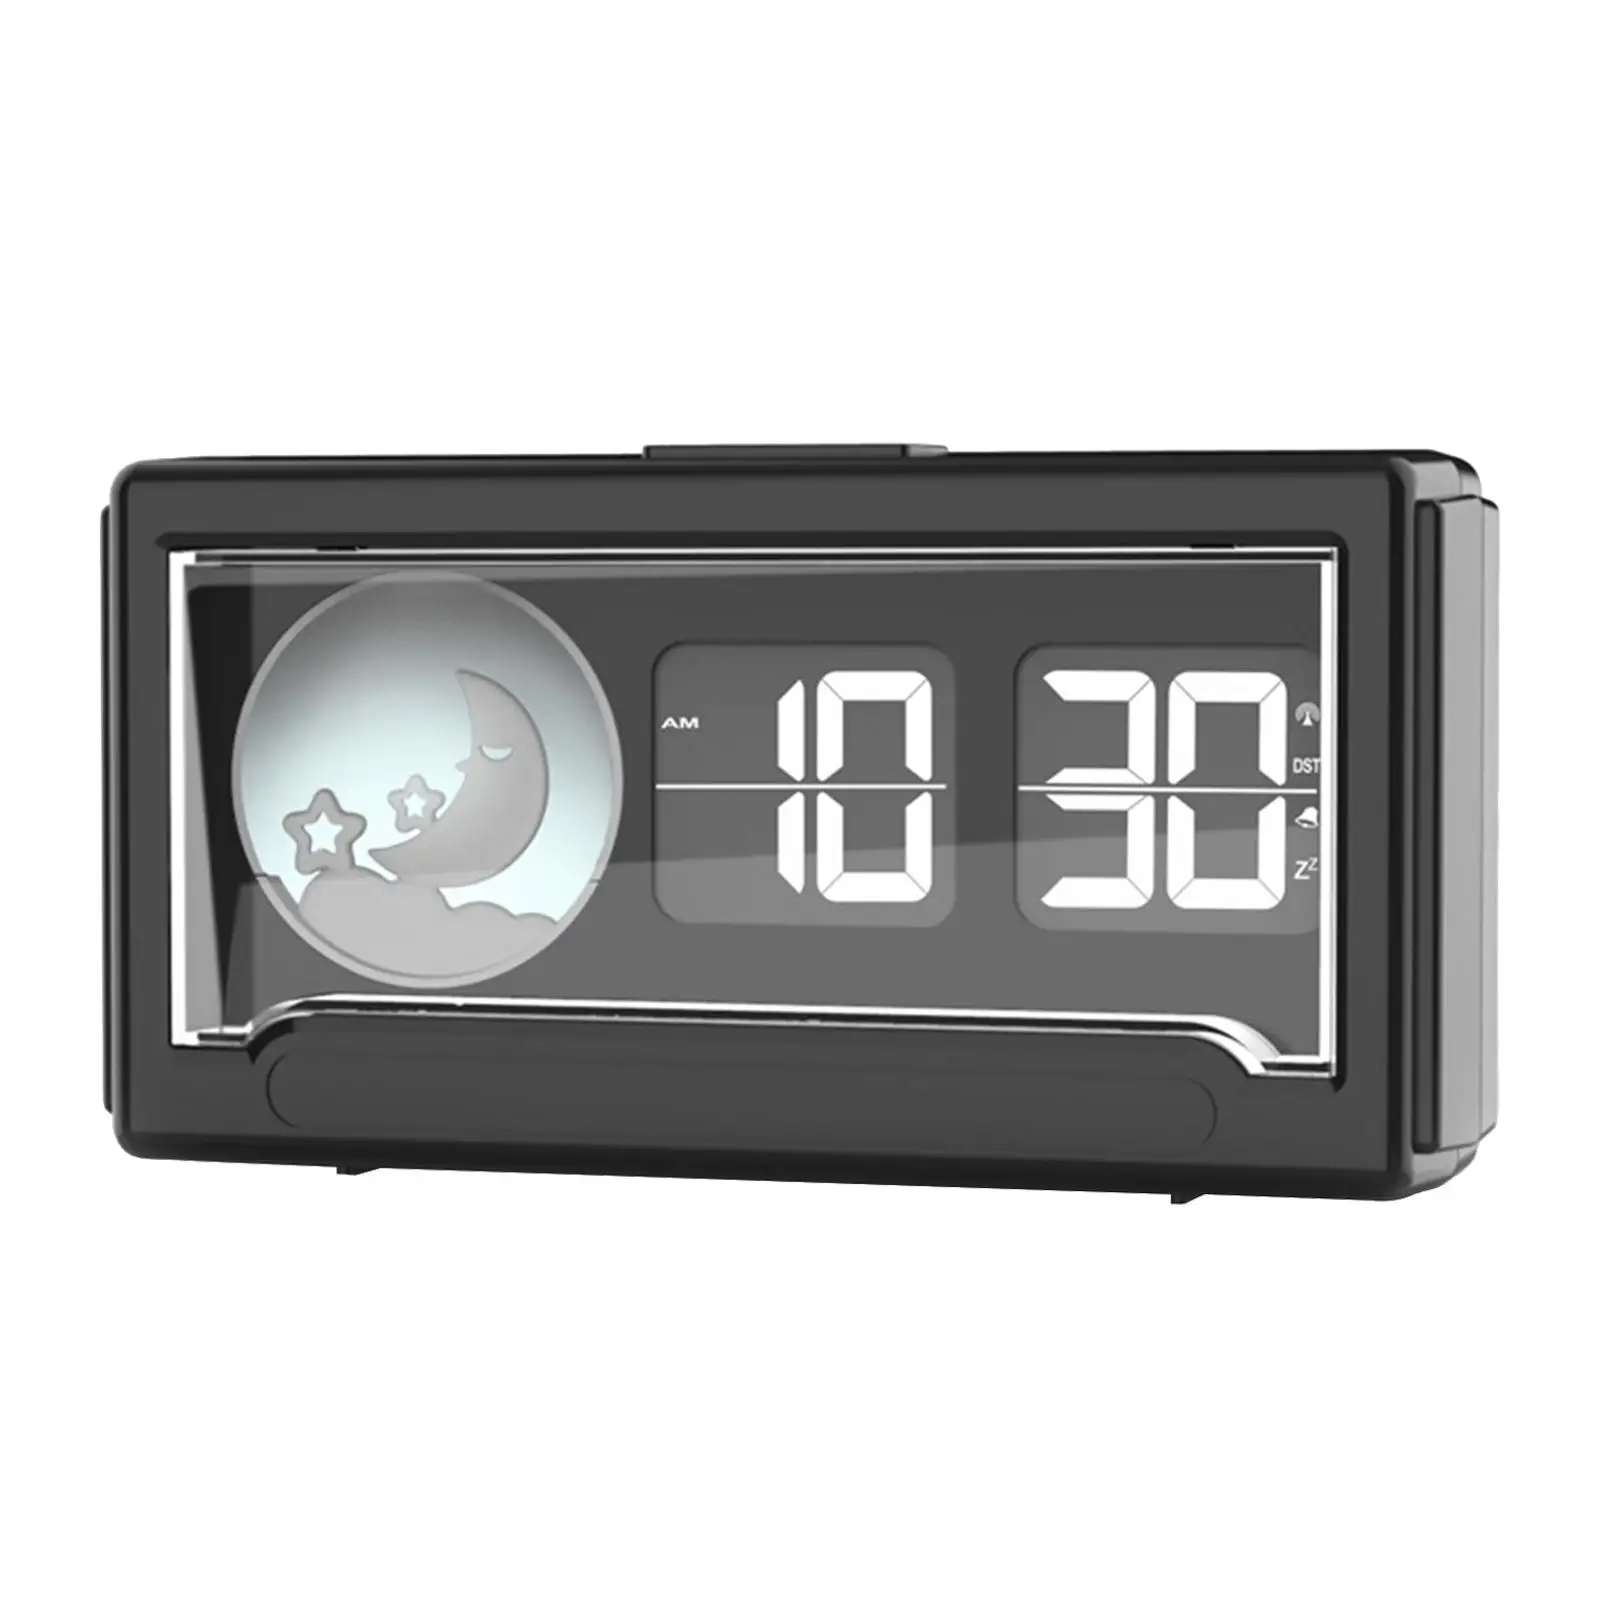 Auto Flip Clock 12 Hours Format Display Vintage Clock Flip Down Clock Retro Table Clock for Office Kitchen Home Decoration